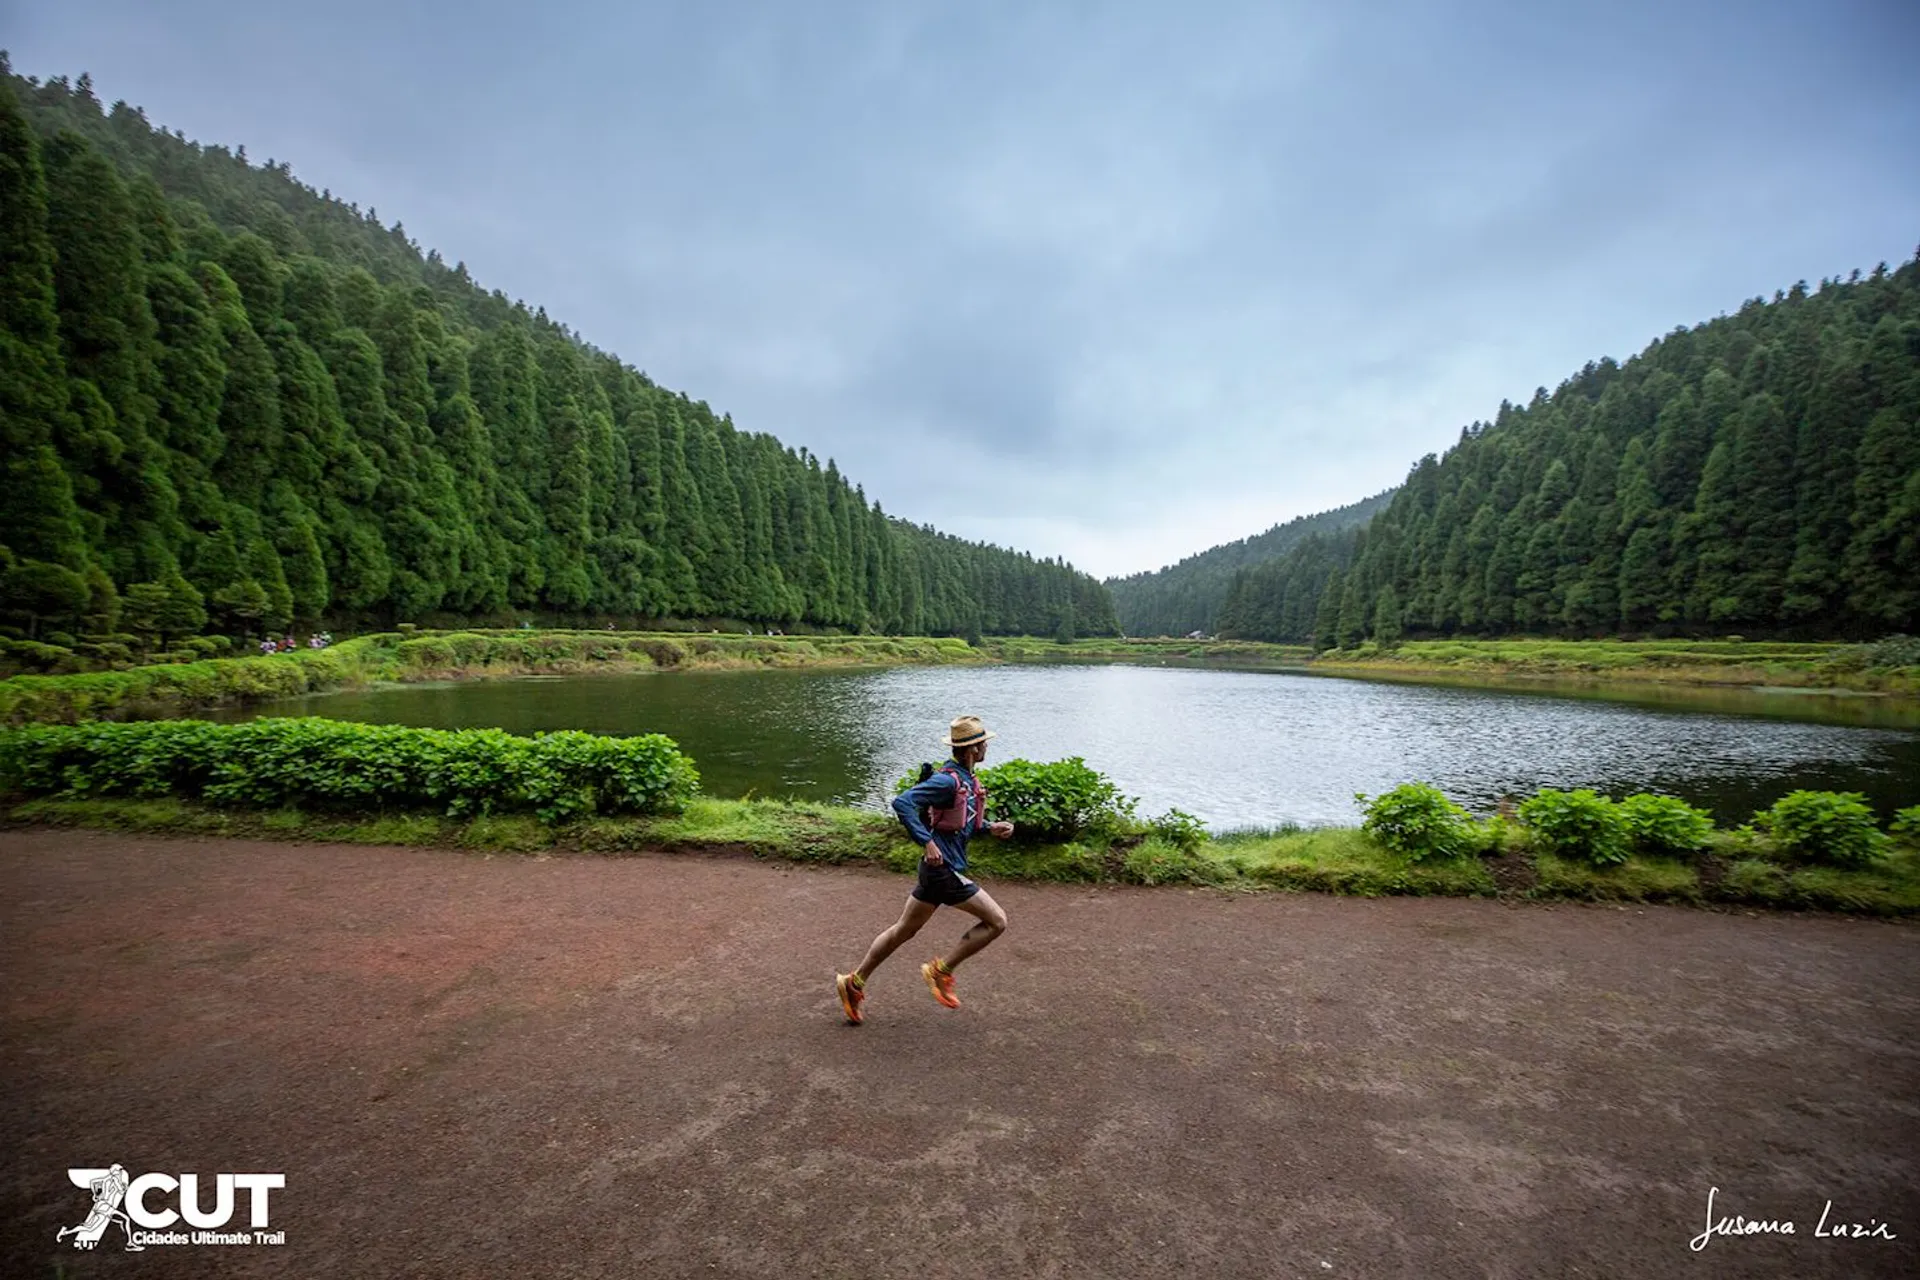 Image of 7 Cidades Ultimate Trail